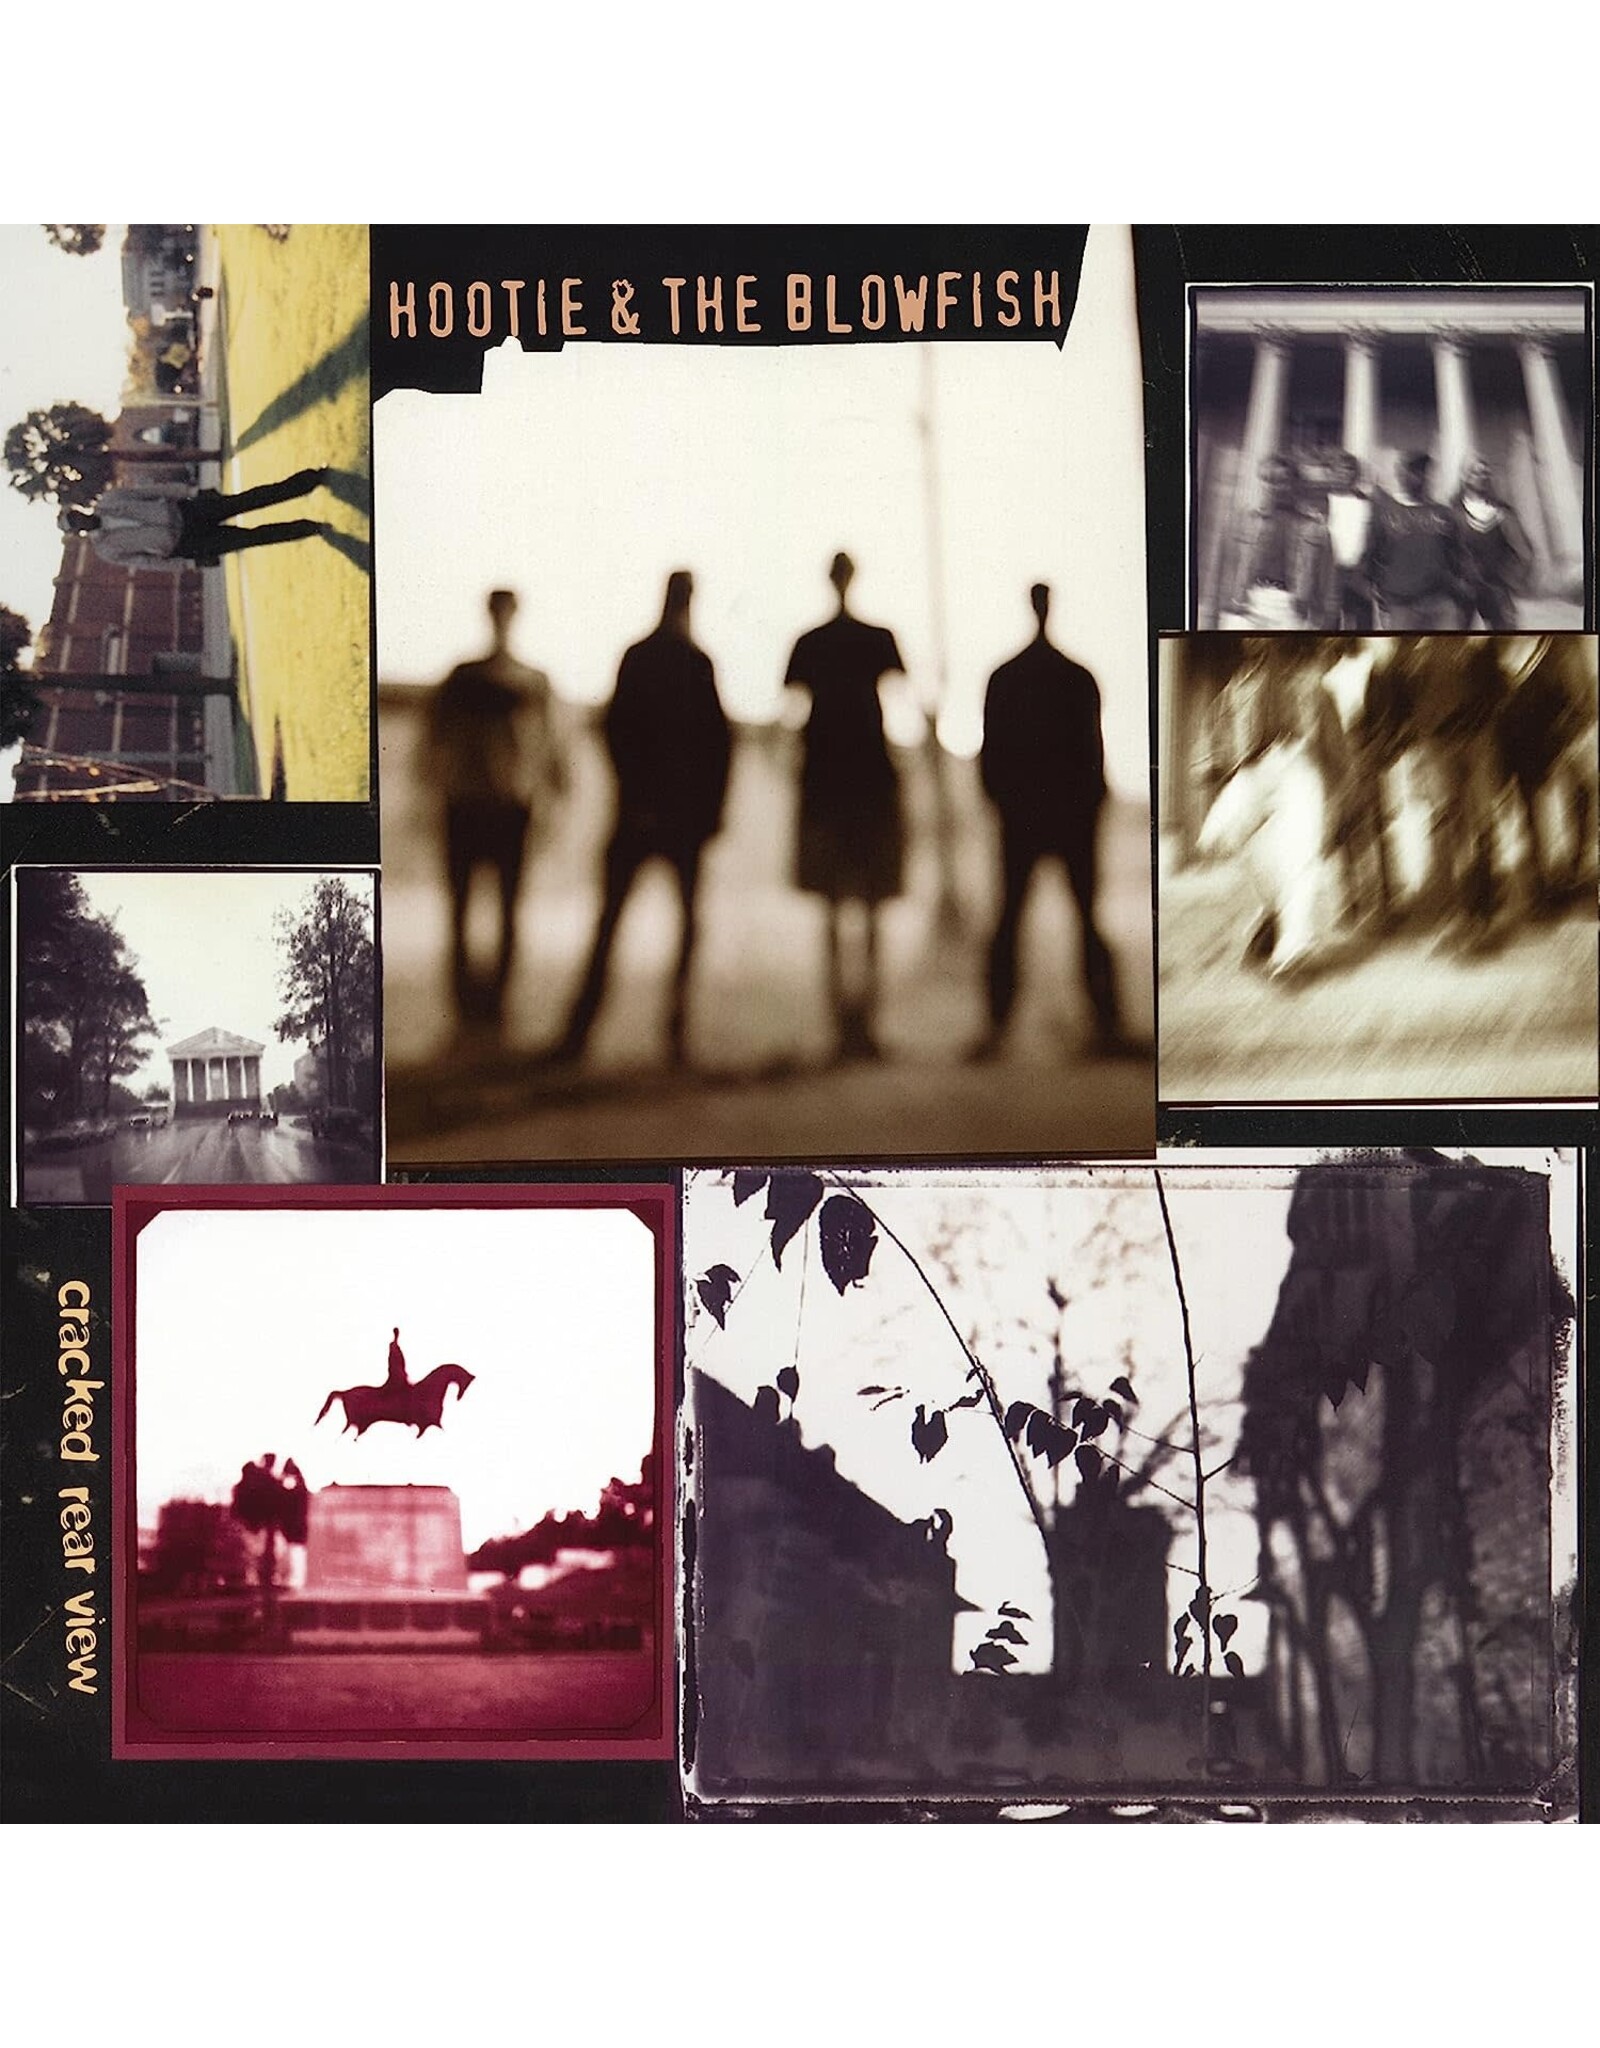 Hootie & The Blowfish - Cracked Rear View (Crystal Clear Vinyl)